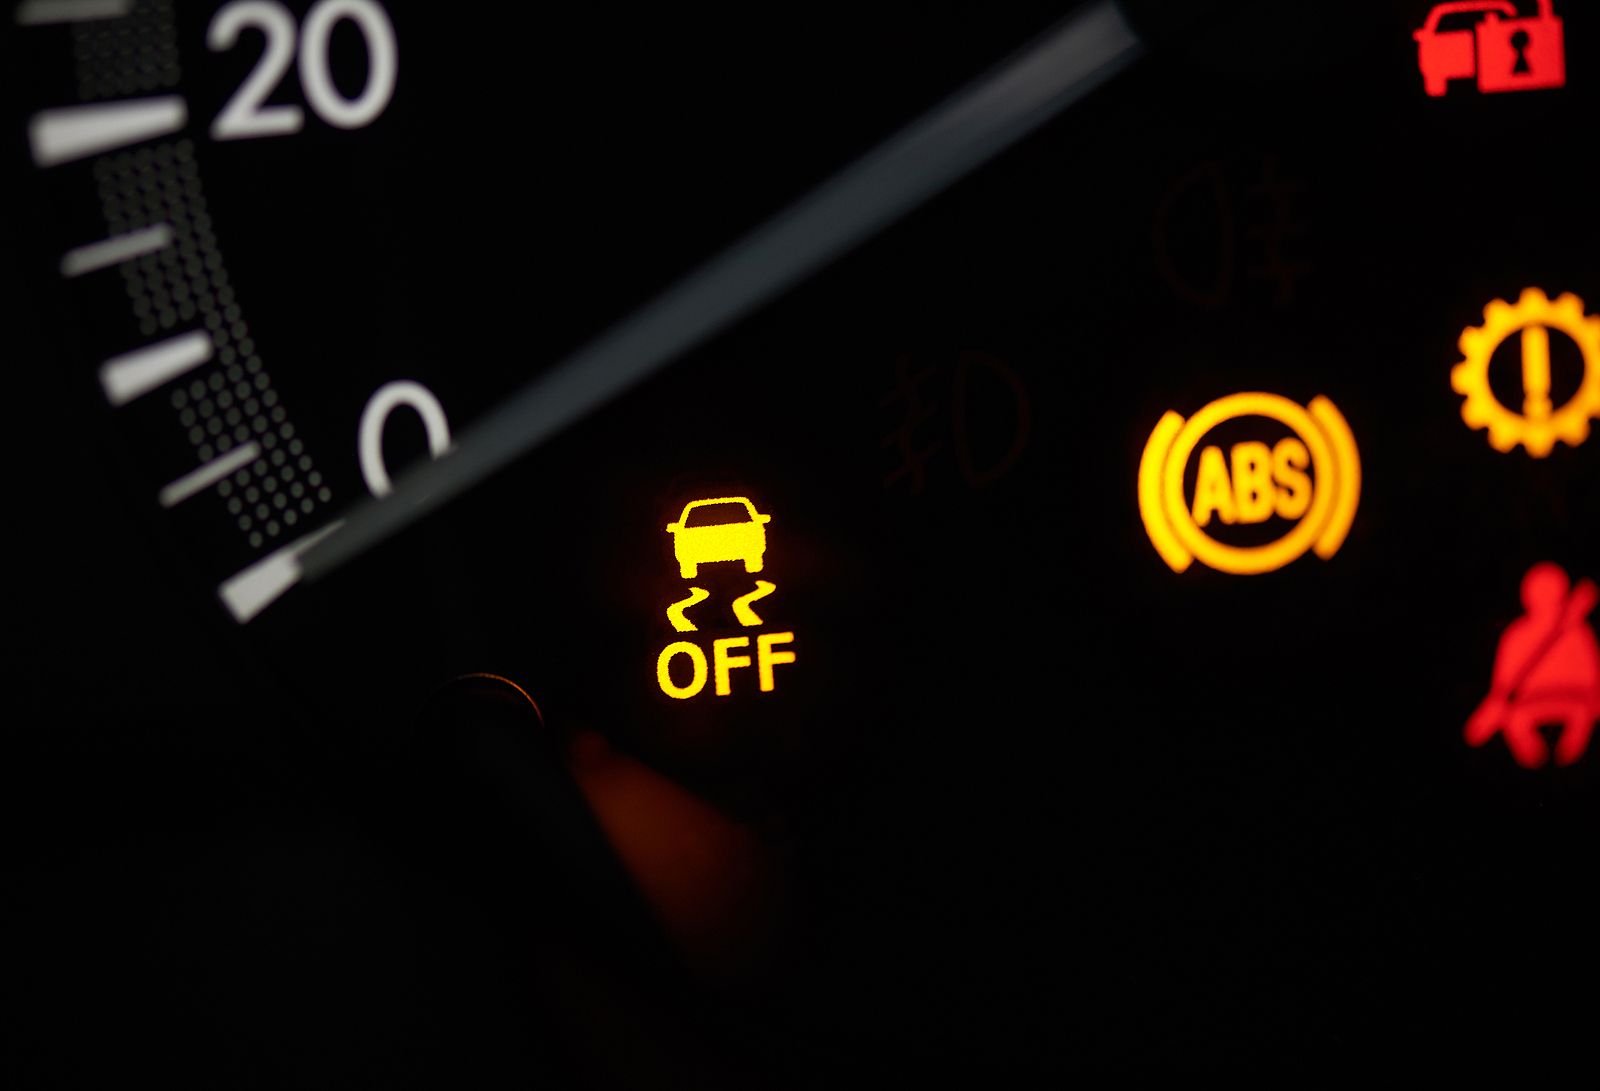 The indicator for ESC in a car